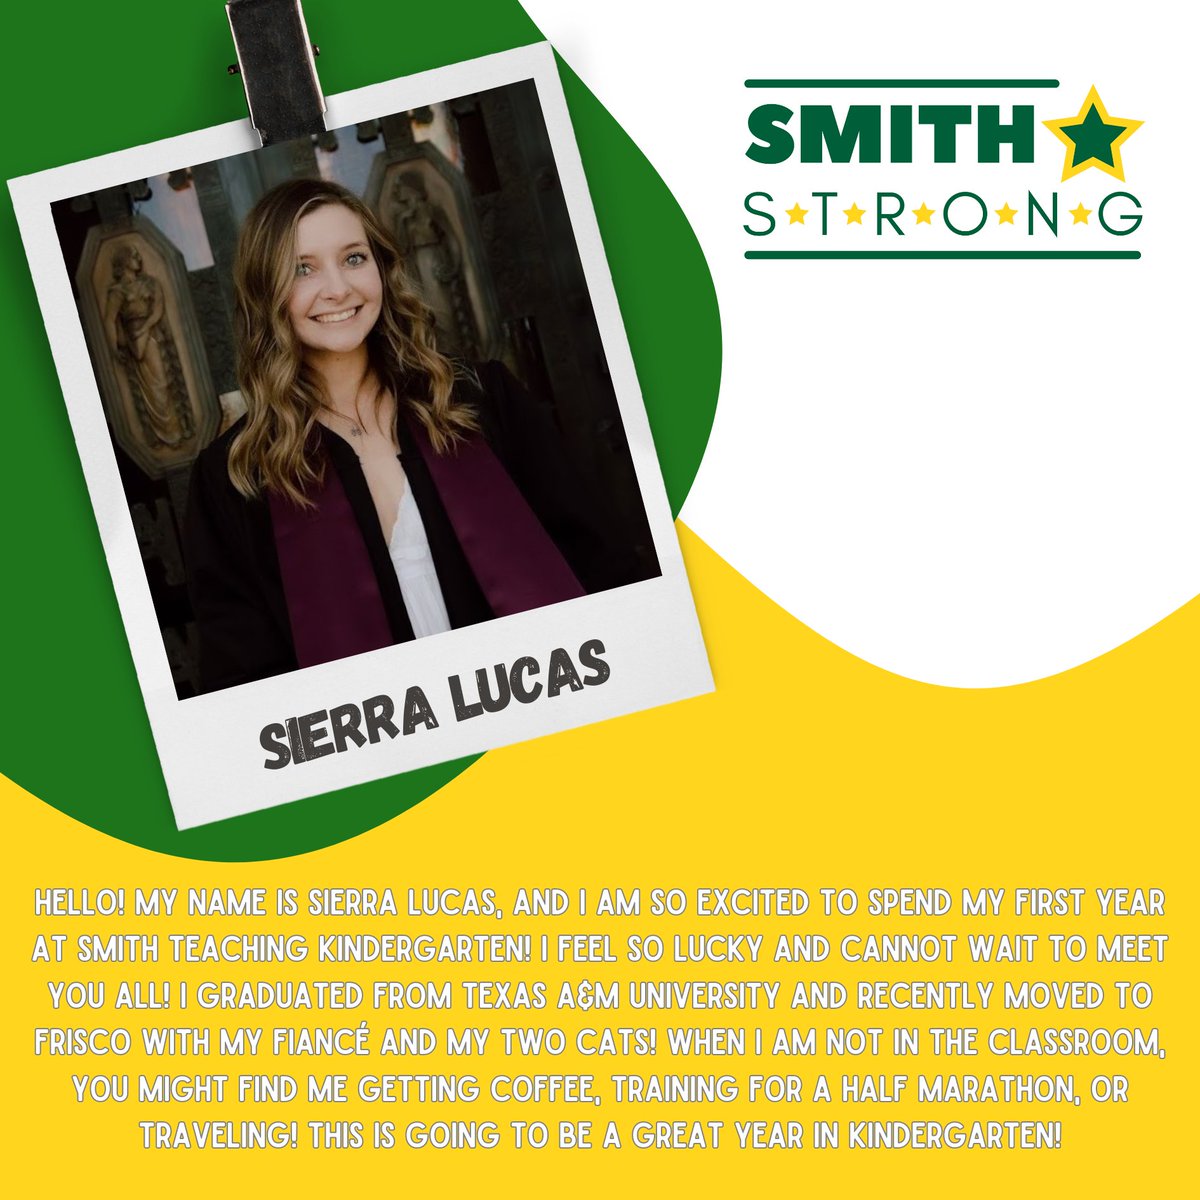 #SMITHSTRONG💪, help us welcome Sierra Lucas to Smith Elementary! She will be joining our Kindergarten team here at Smith Elementary!💪💚⭐️